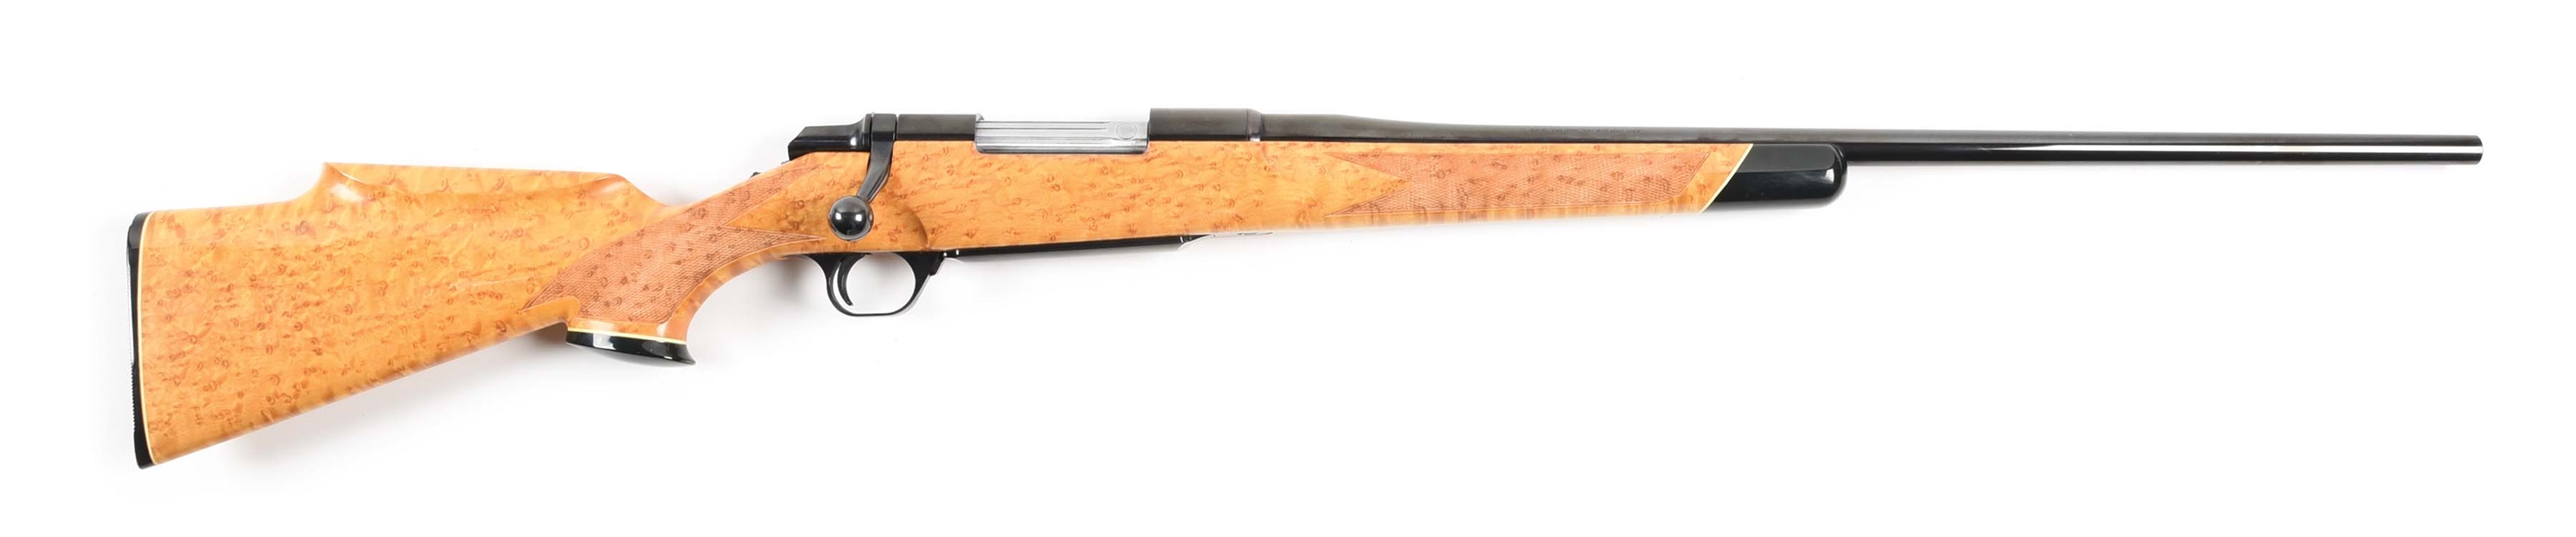 (M) BROWNING BBR BOLT ACTION RIFLE WITH MAPLE (BIRDSEYE)/ ACER SACCHARUM STOCK.